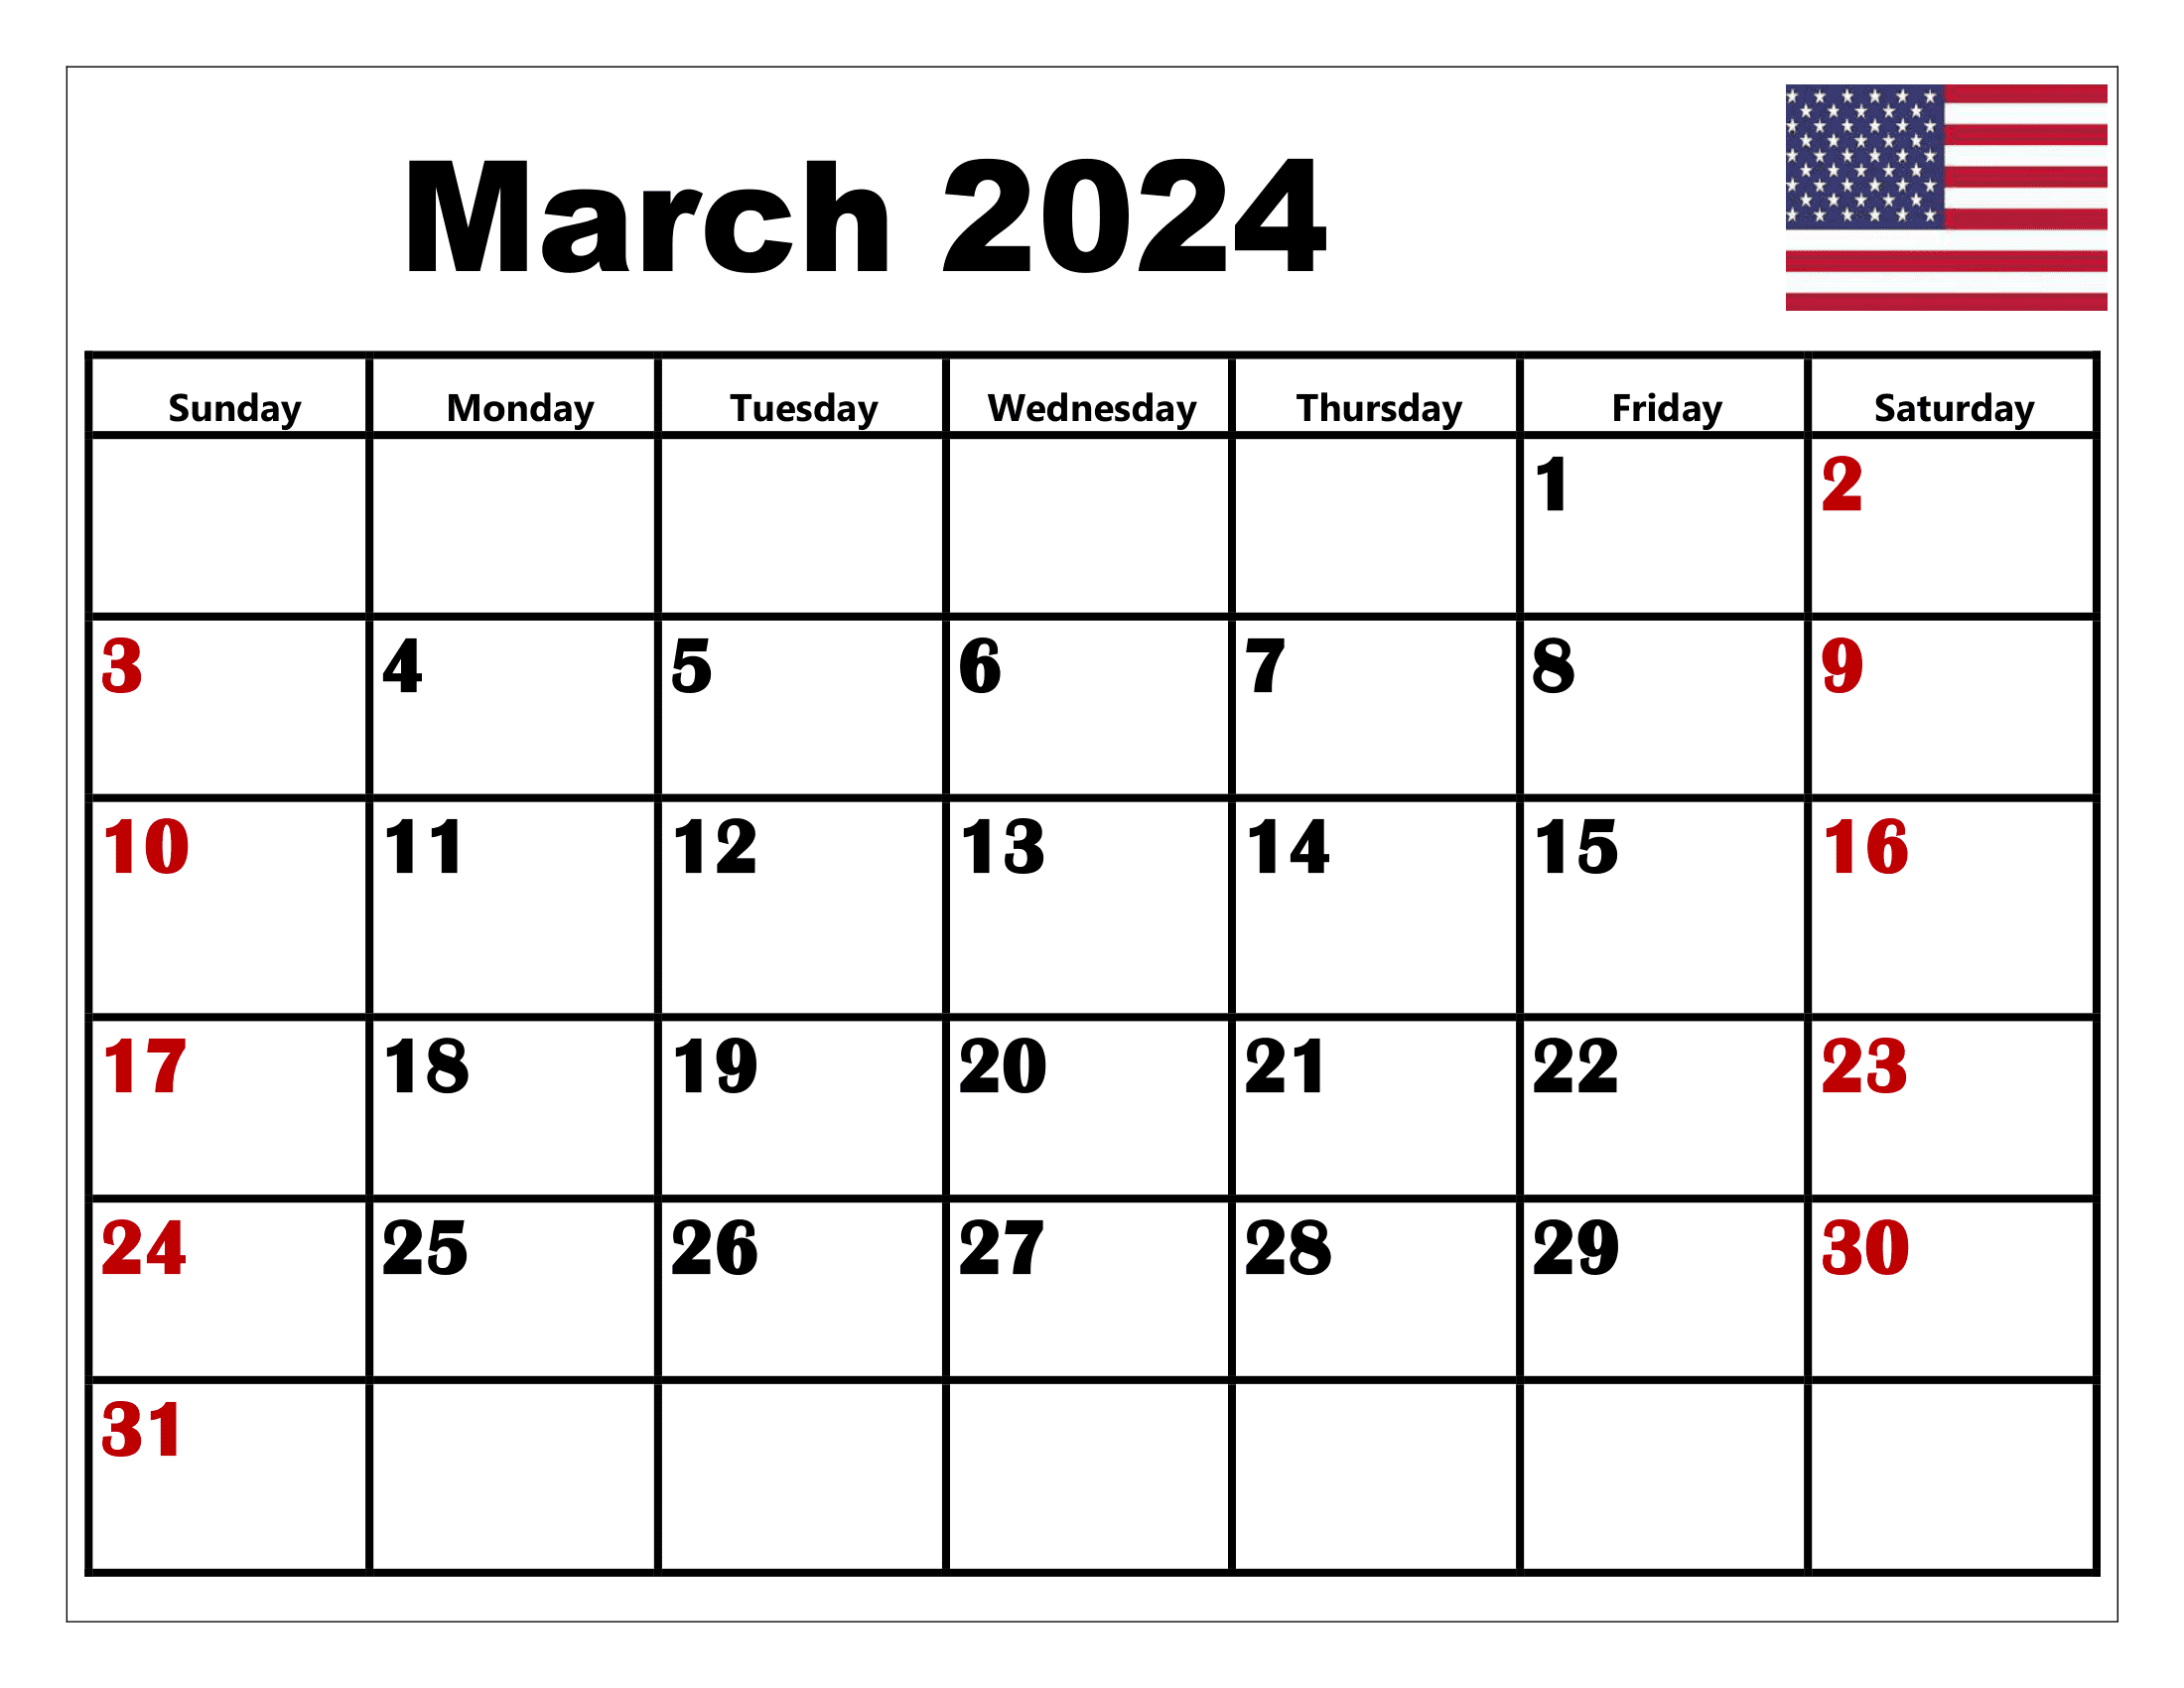 March 2024 Calendar Printable Pdf With Holidays Template Free for March 2024 Calendar With Holidays Printable